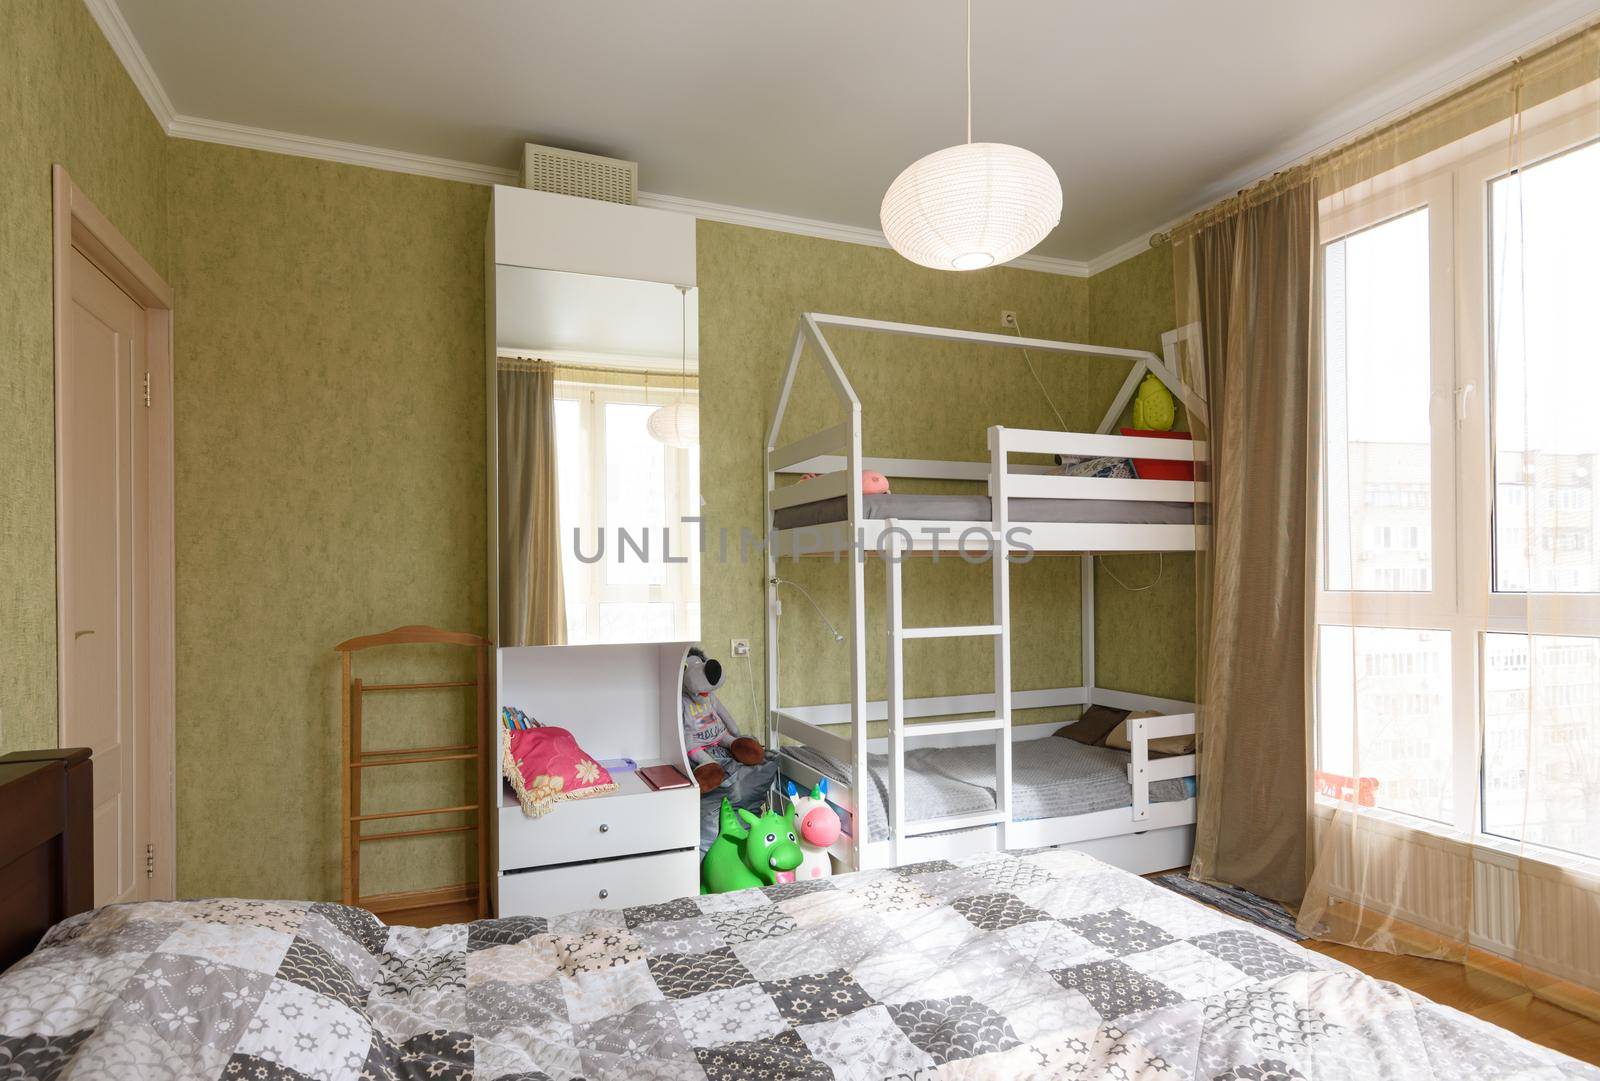 Interior of an adult bedroom, in the room there is a children's bunk bed